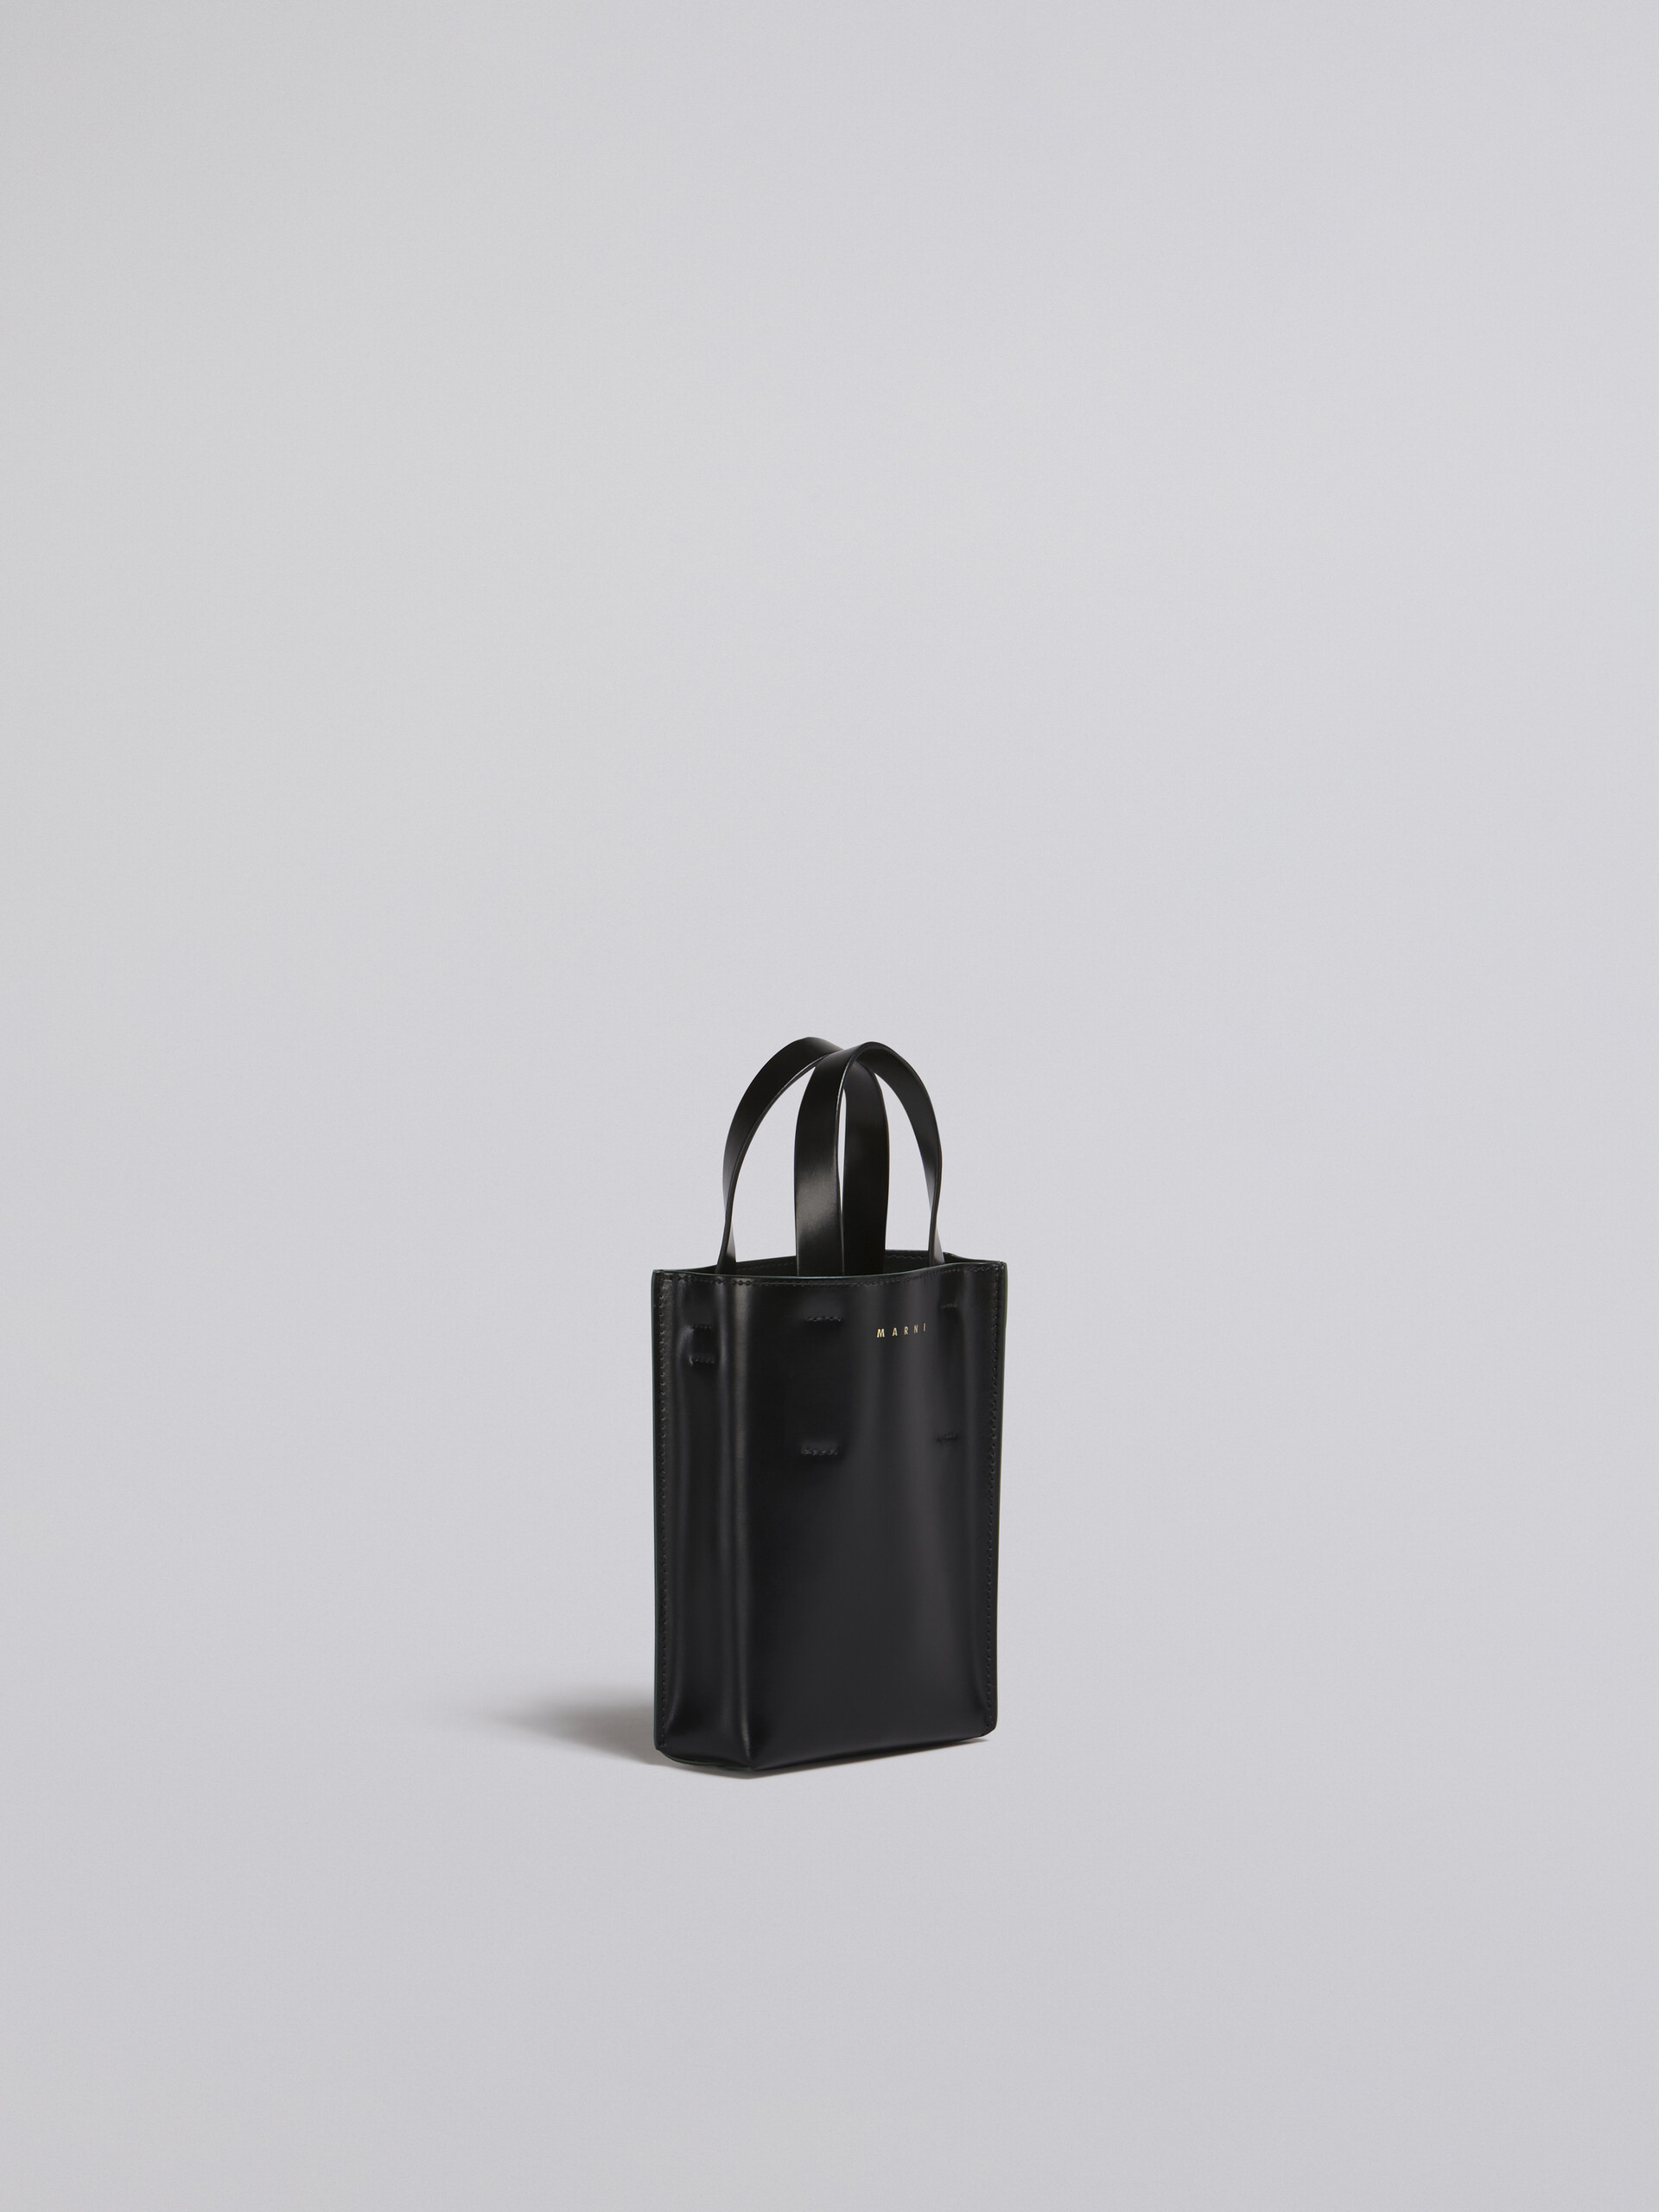 MUSEO nano bag in black shiny leather - Shopping Bags - Image 5